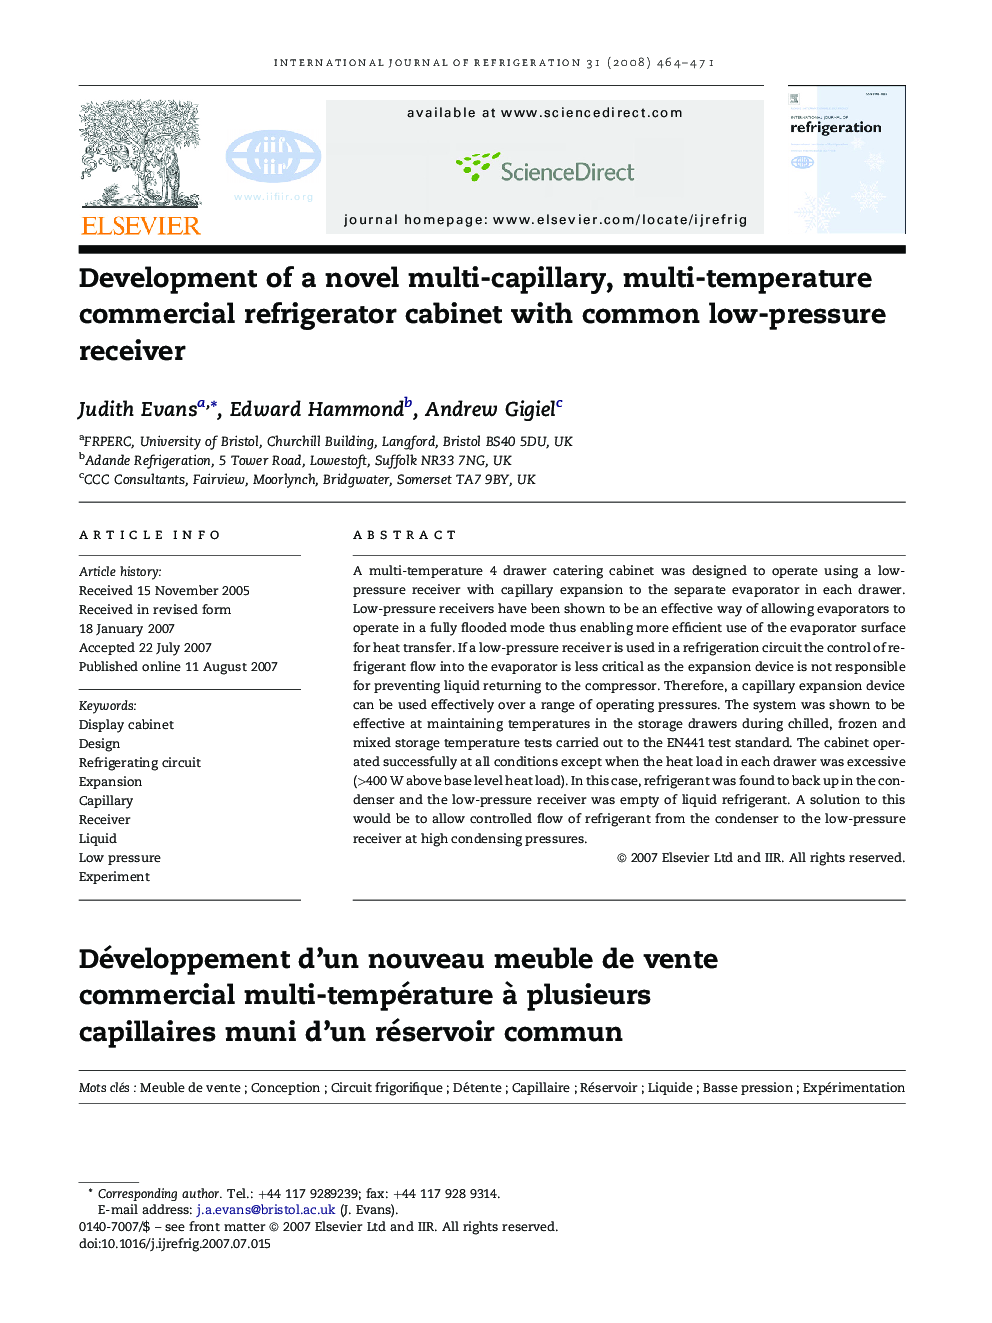 Development of a novel multi-capillary, multi-temperature commercial refrigerator cabinet with common low-pressure receiver